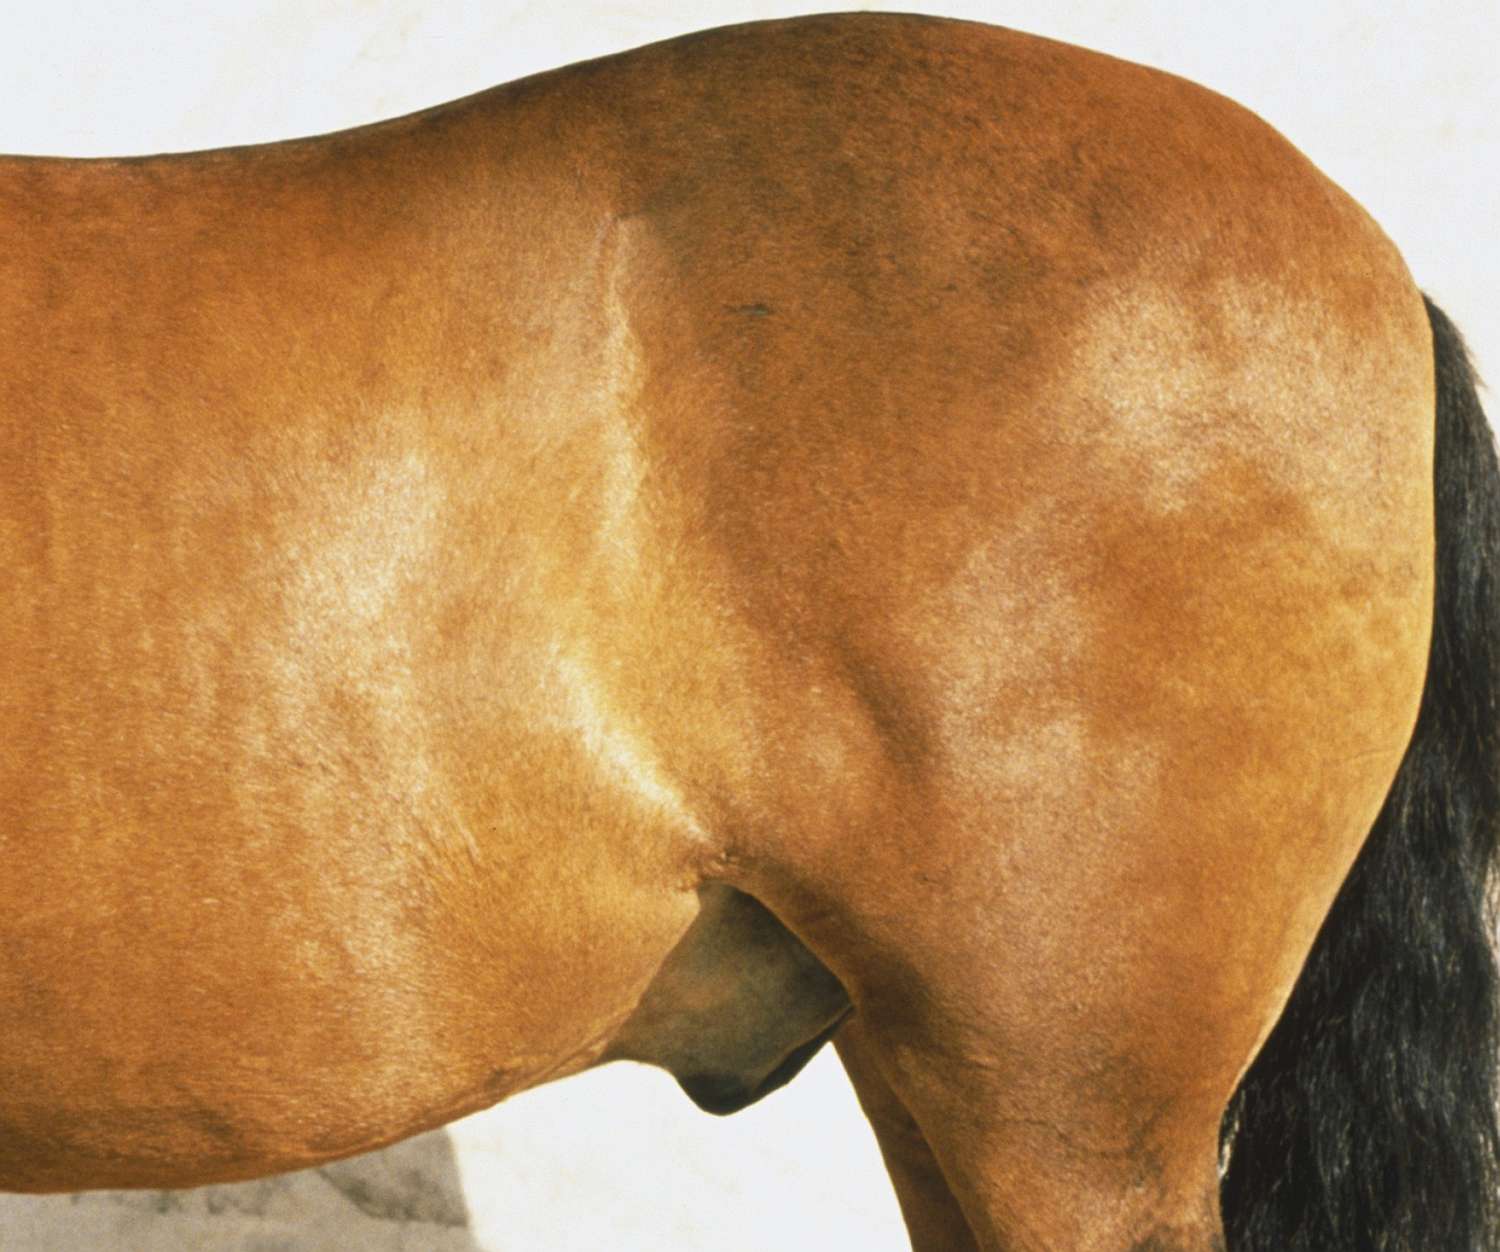 Hind quarters of a horse.